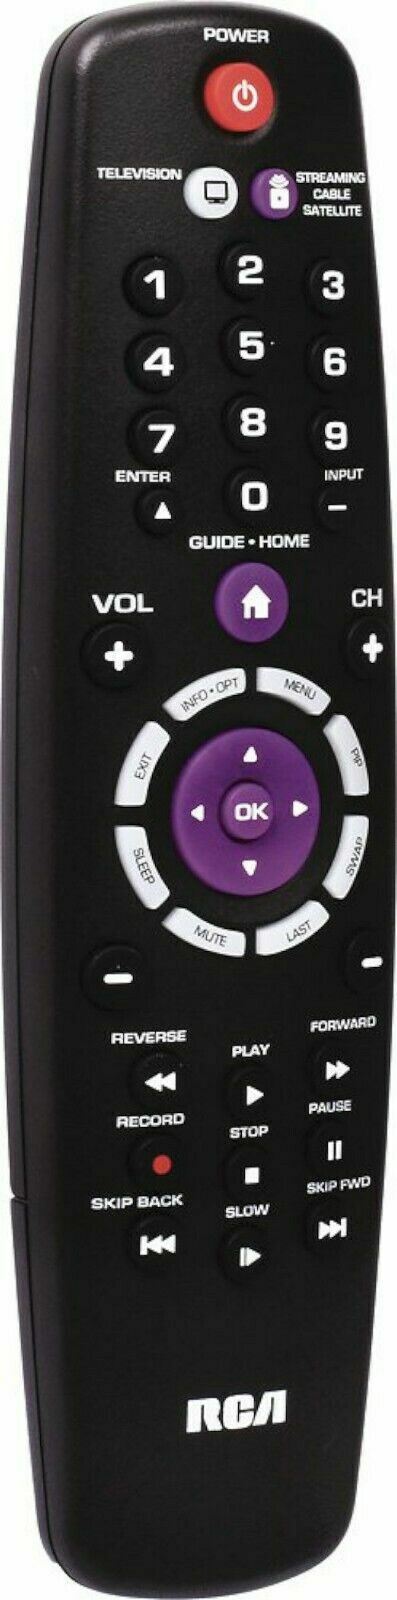 NEW RCA RCR002RWDZ 2-Device Universal Remote with Streaming Player Codes - Black